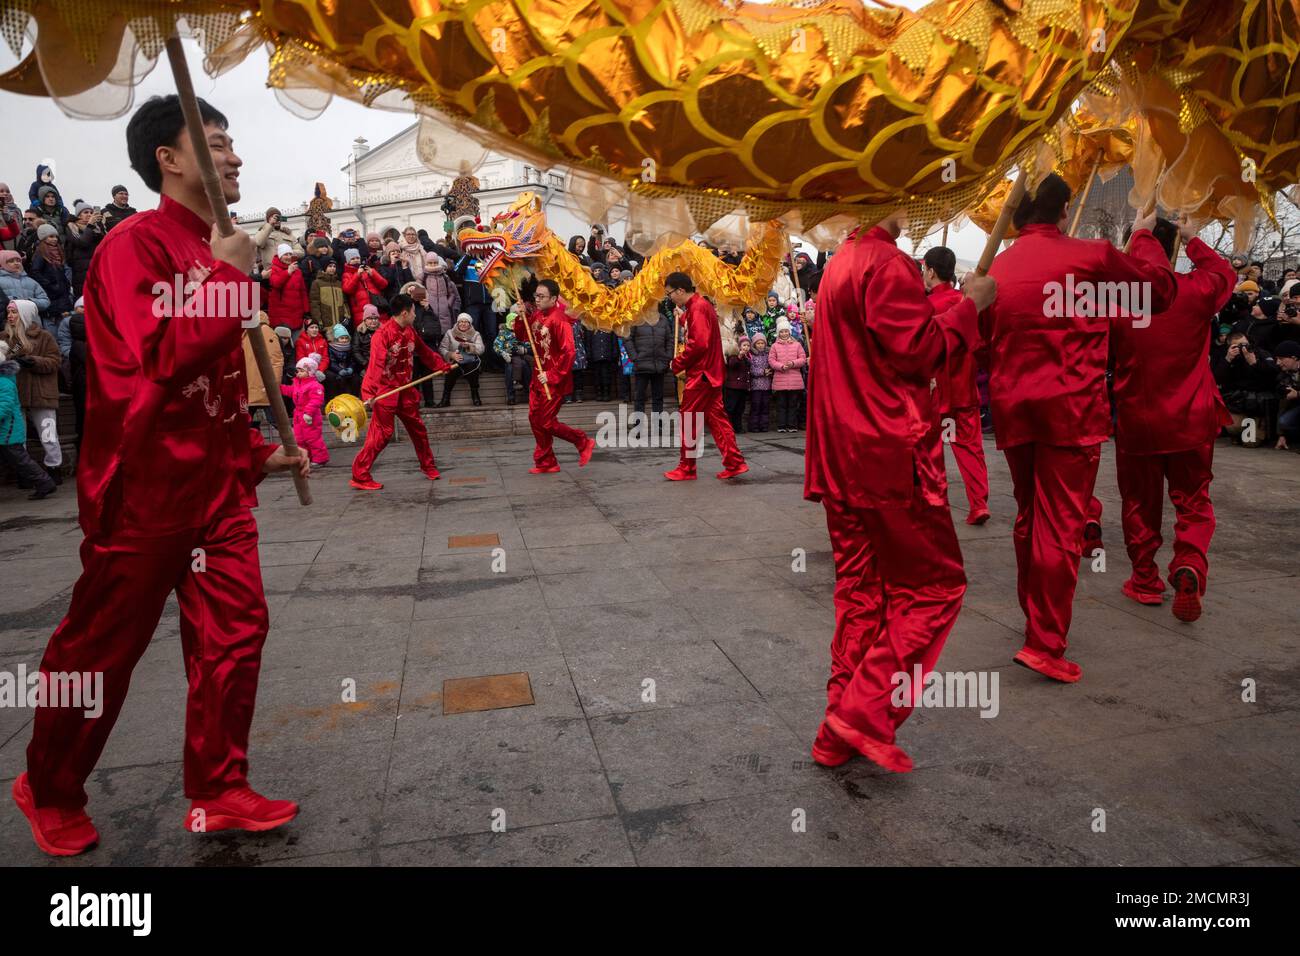 Moscow, Russia. 21st of January, 2023. Artists perform a dragon dance during the Chinese Lunar New Year celebration at the Exhibition of Achievements of National Economy (VDNH) in Moscow, Russia. Nikolay Vinokurov/Alamy Live News Stock Photo